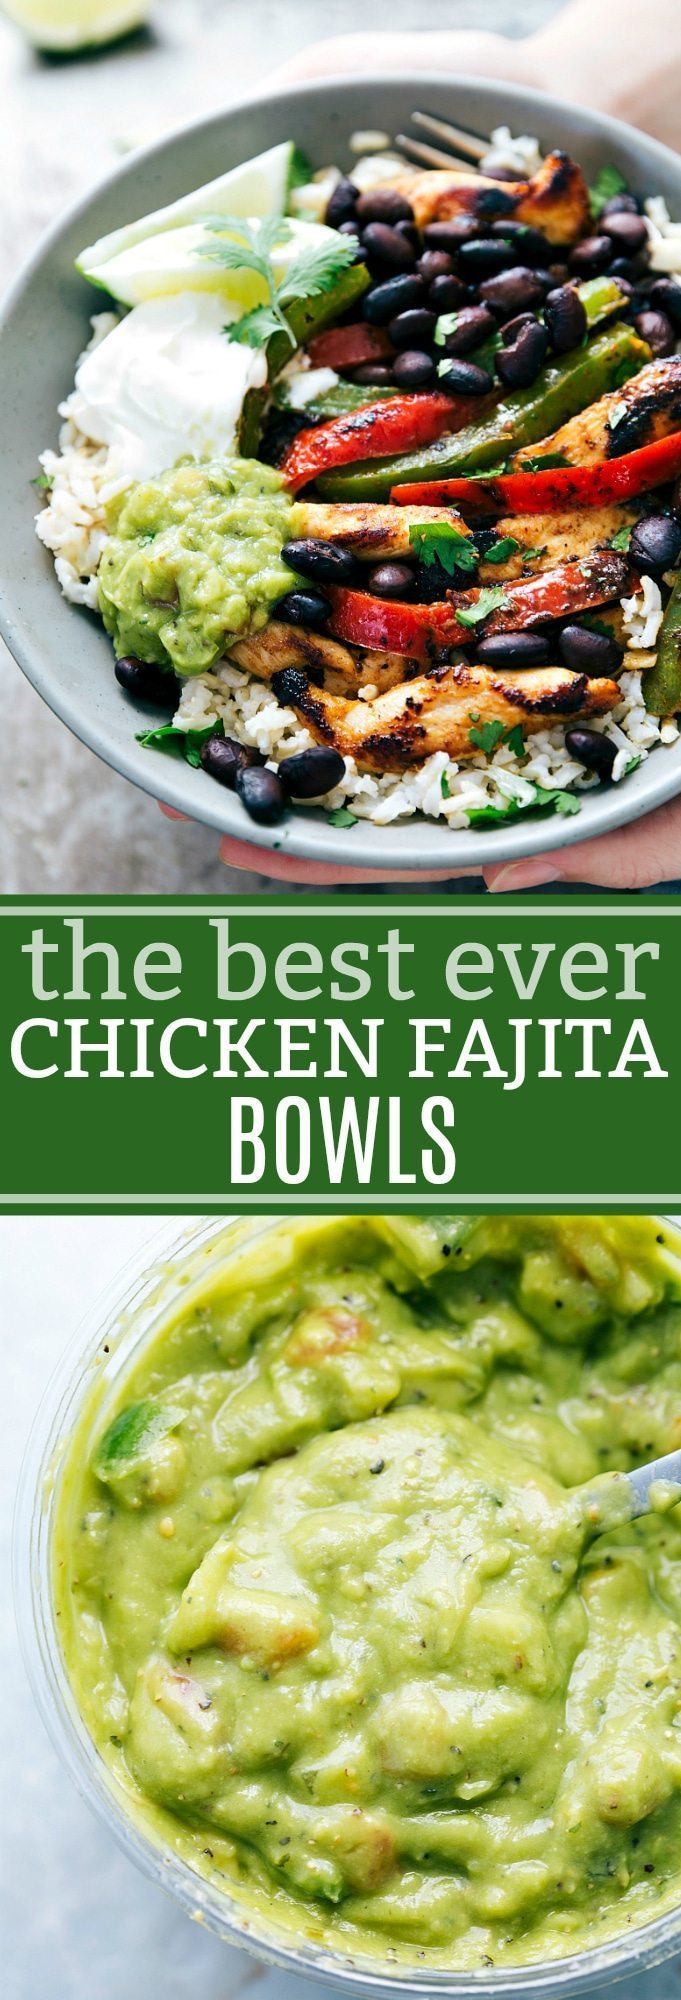 The ultimate BEST EVER Chicken Fajita Bowls! Delicious and so simple to make! via chelseasmessyapron.com